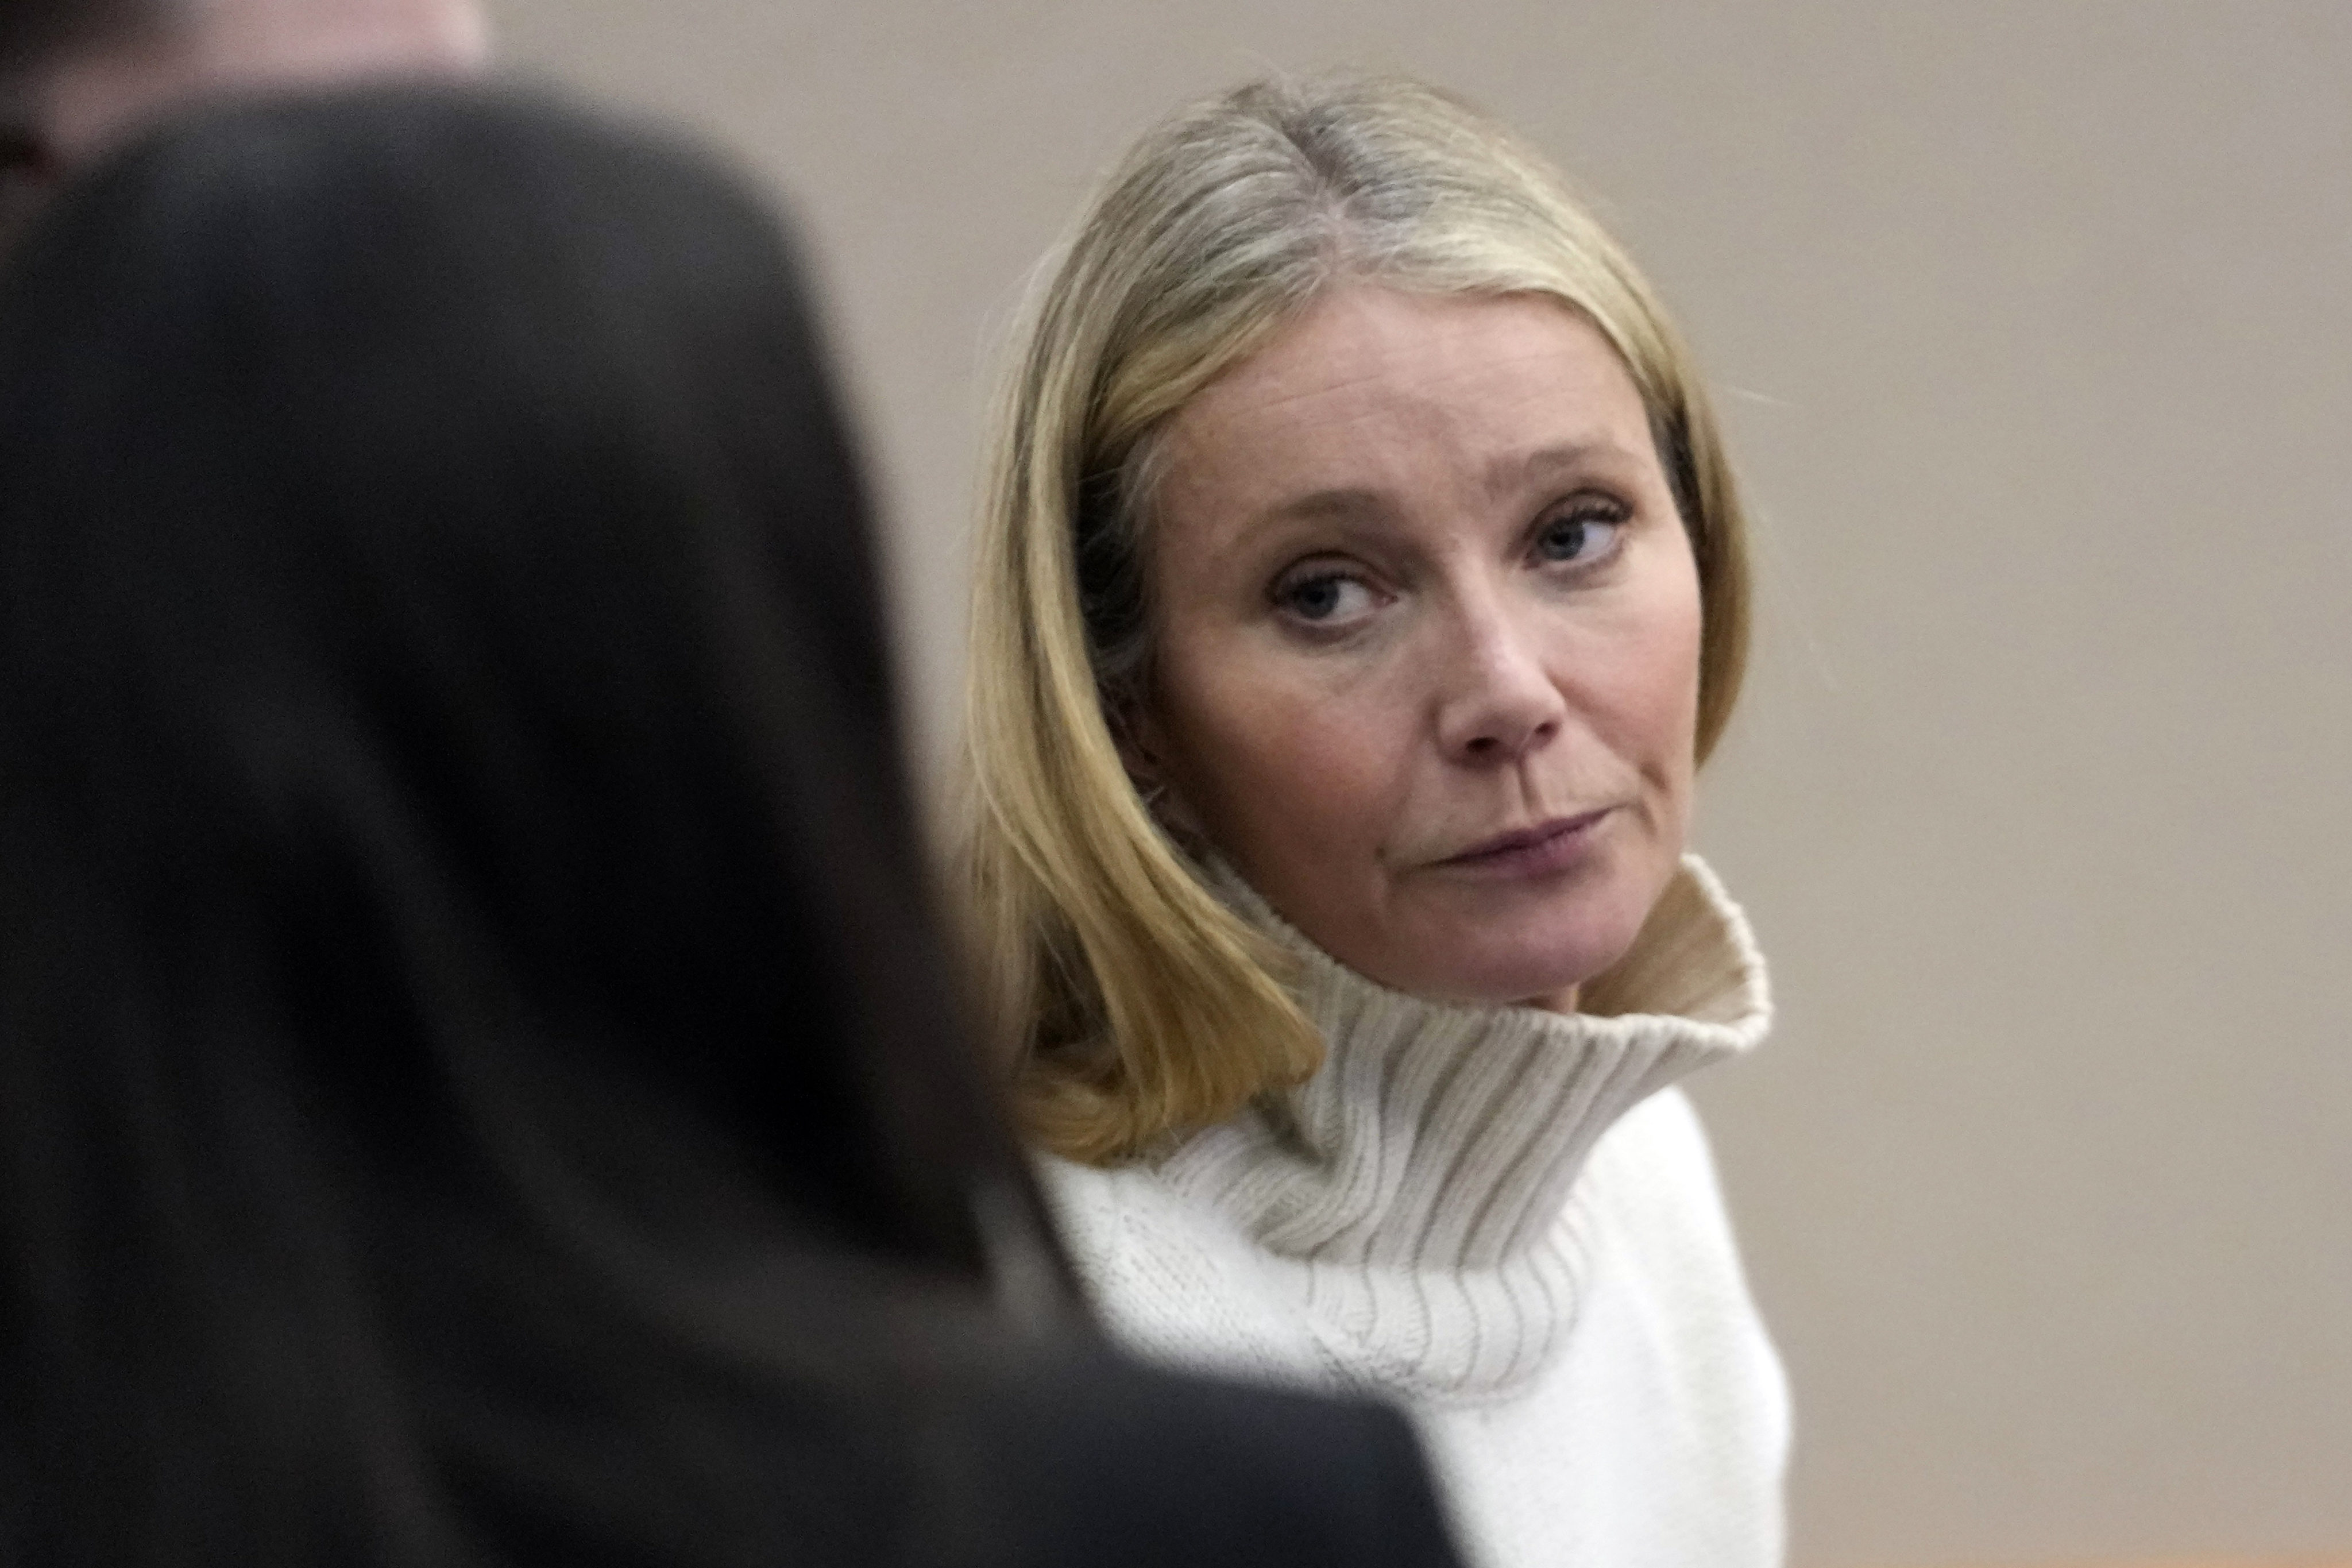 Gwyneth Paltrow is seen in court in Park City, Utah, on Tuesday. Photo: AP